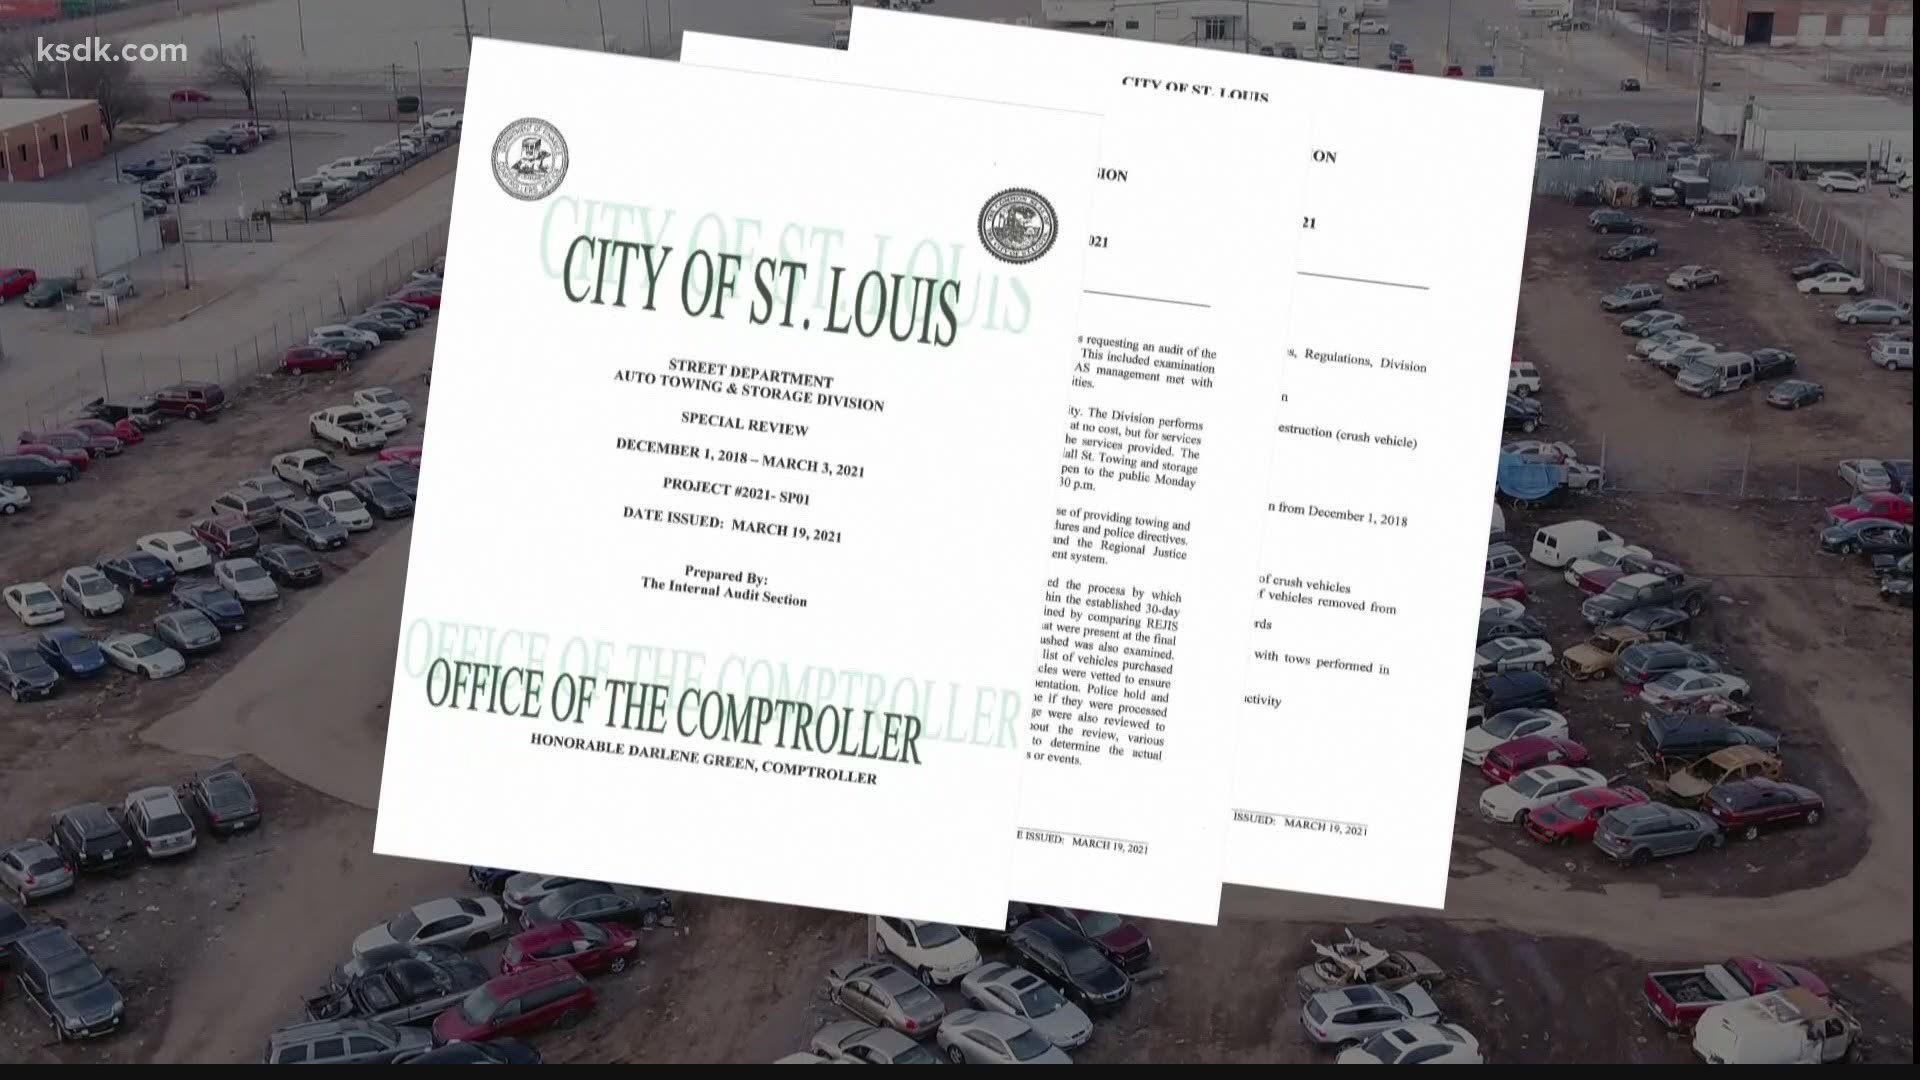 I-Team investigation found that many of woman's claims of improper practices by lot operators had merit